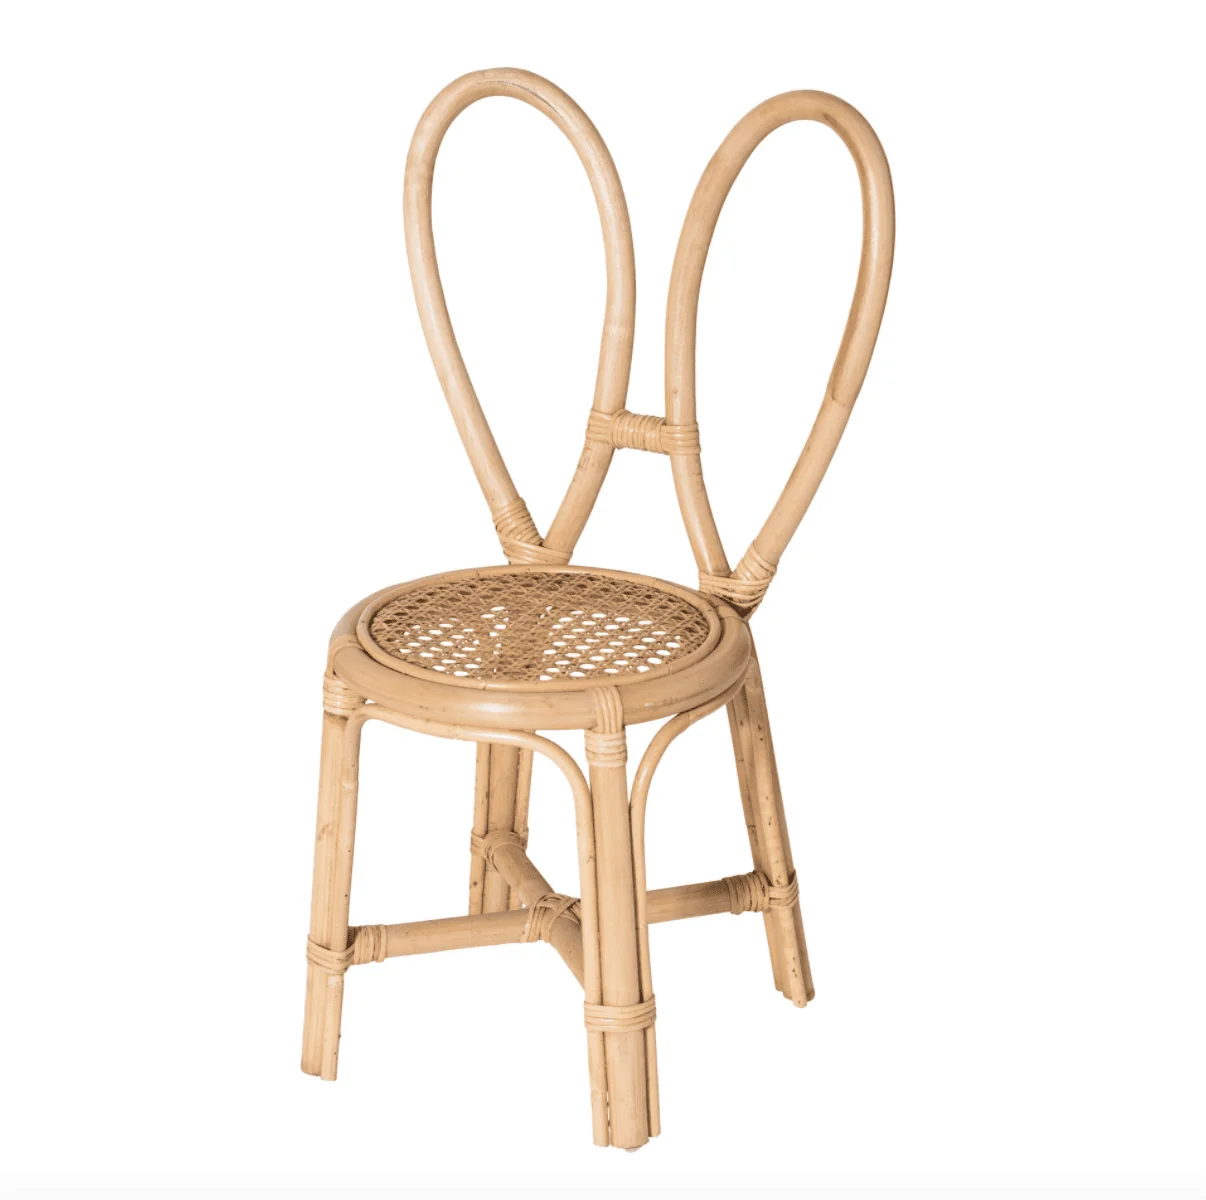 A rattan chair whose back is designed to look like bunny ears in a white space.